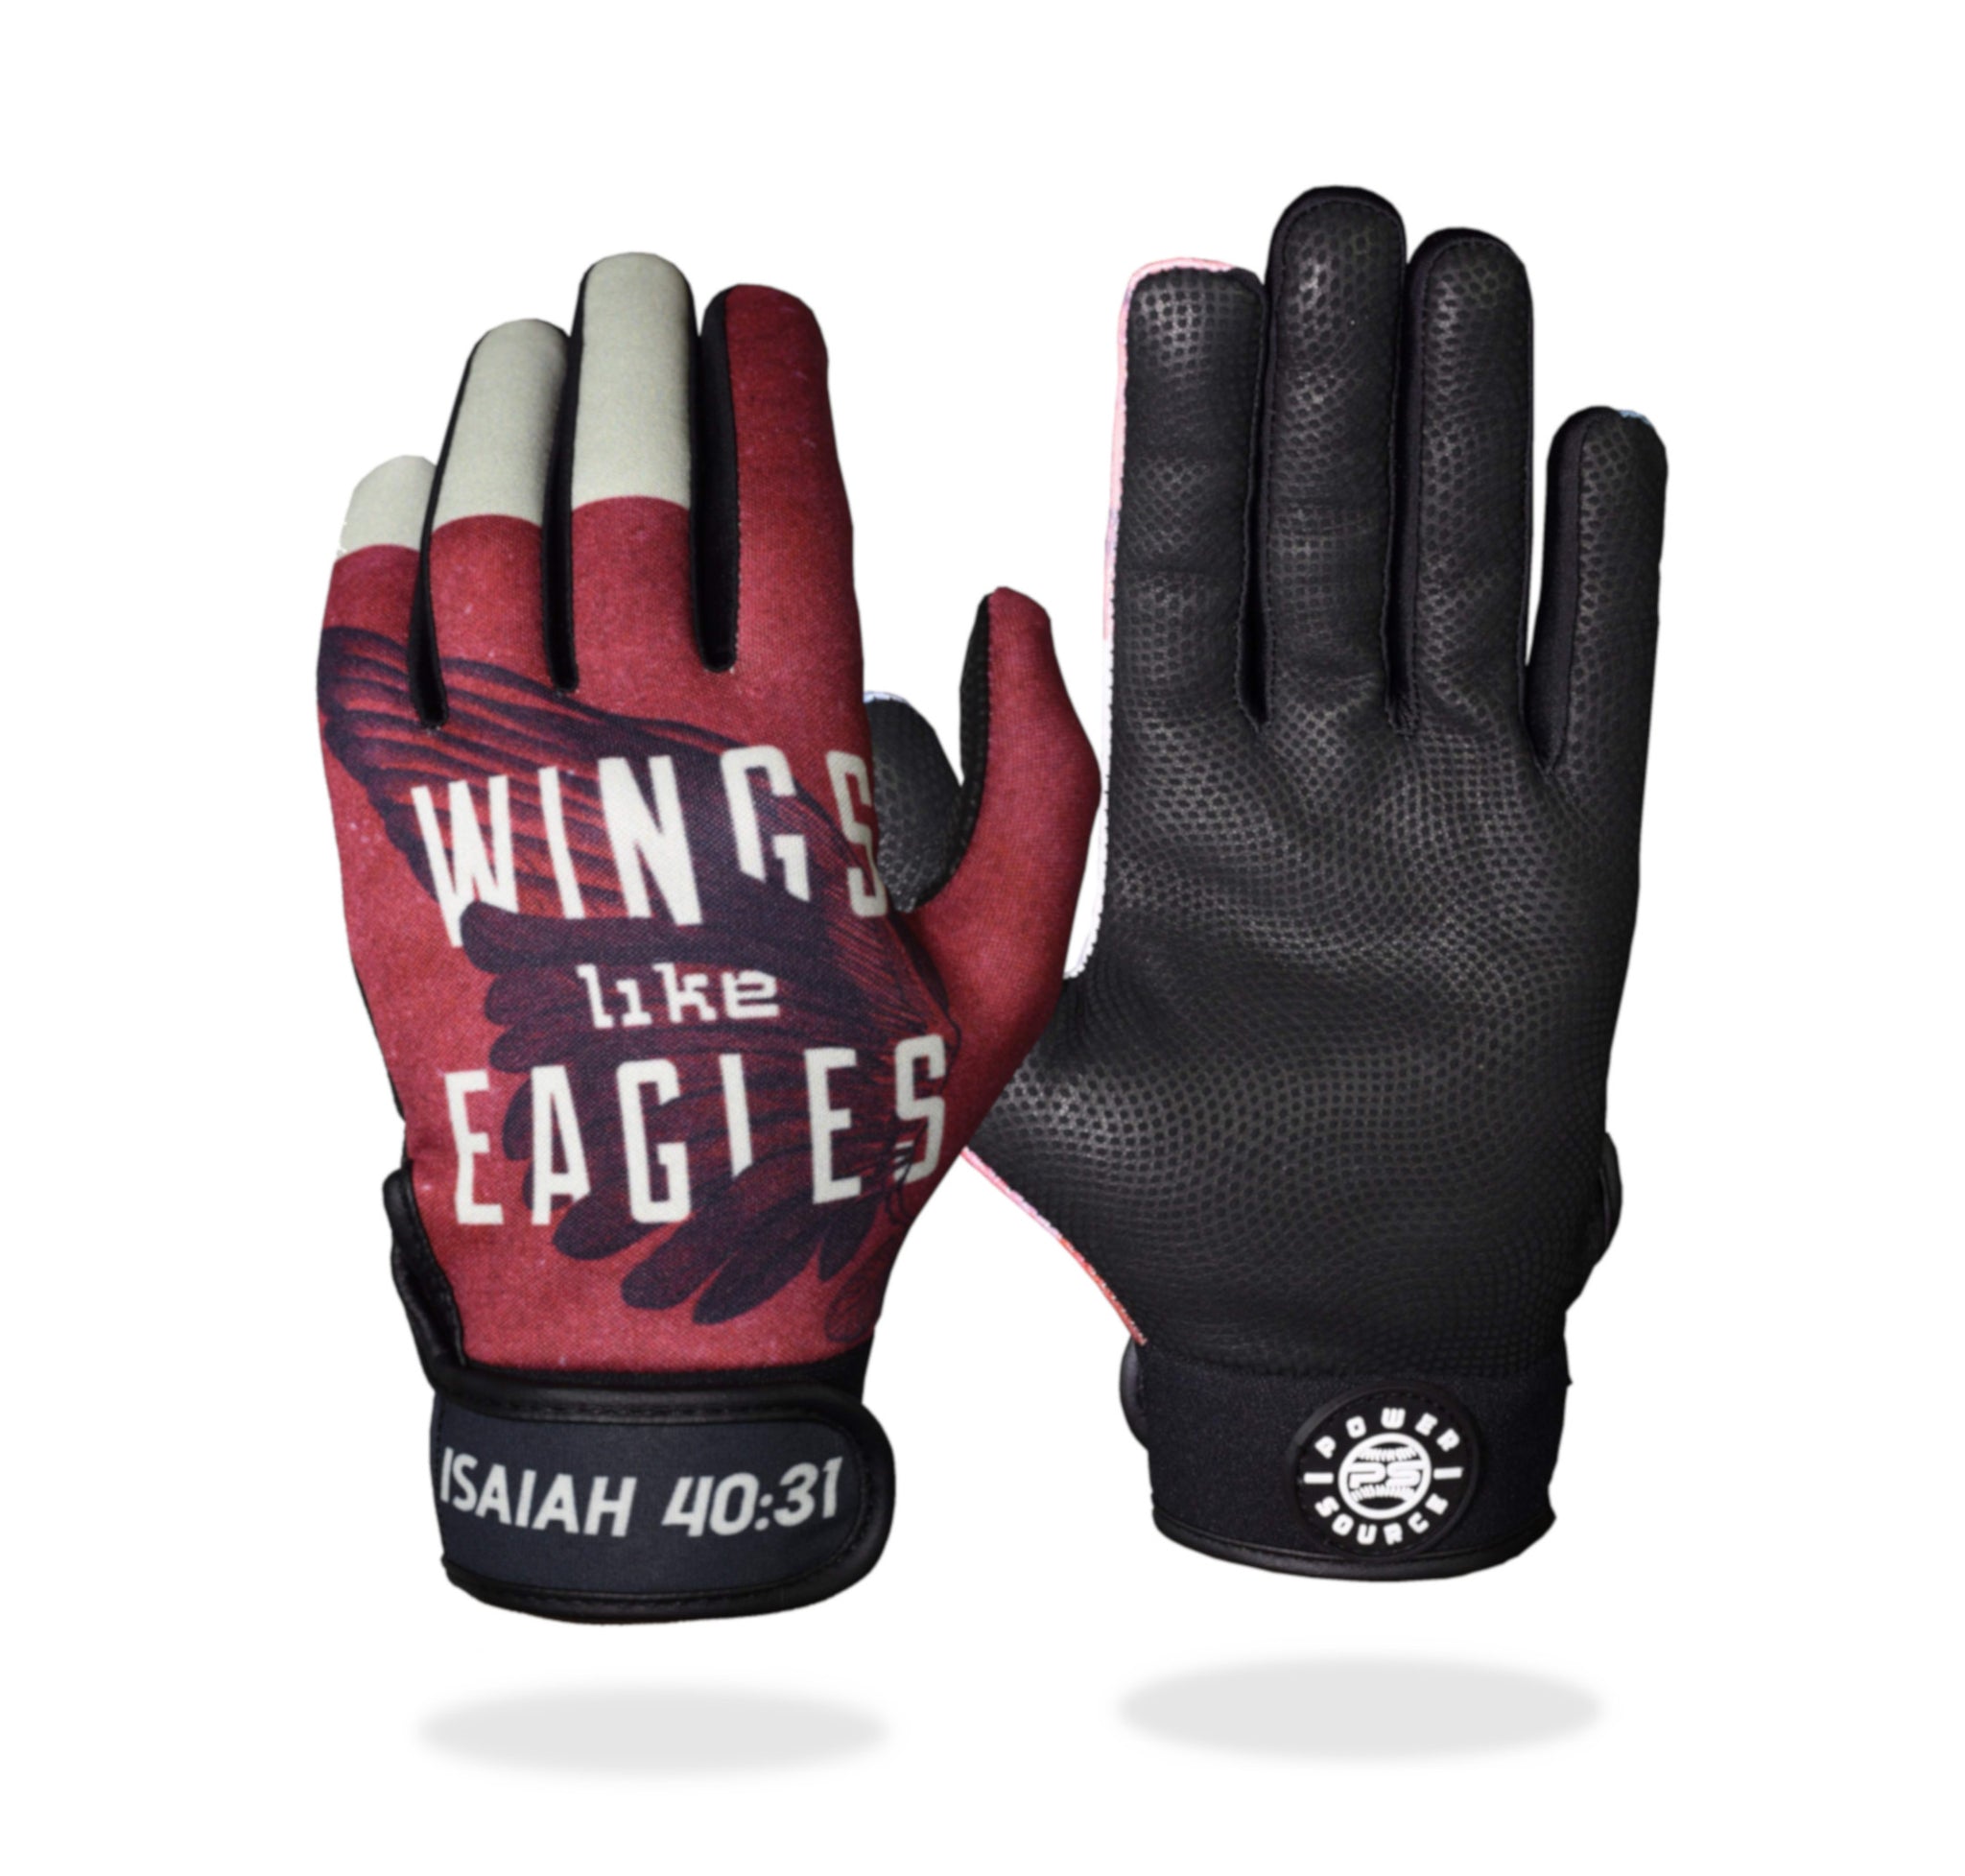 Batting gloves that show off your patriotic spirit from Power Source Baseball Gloves